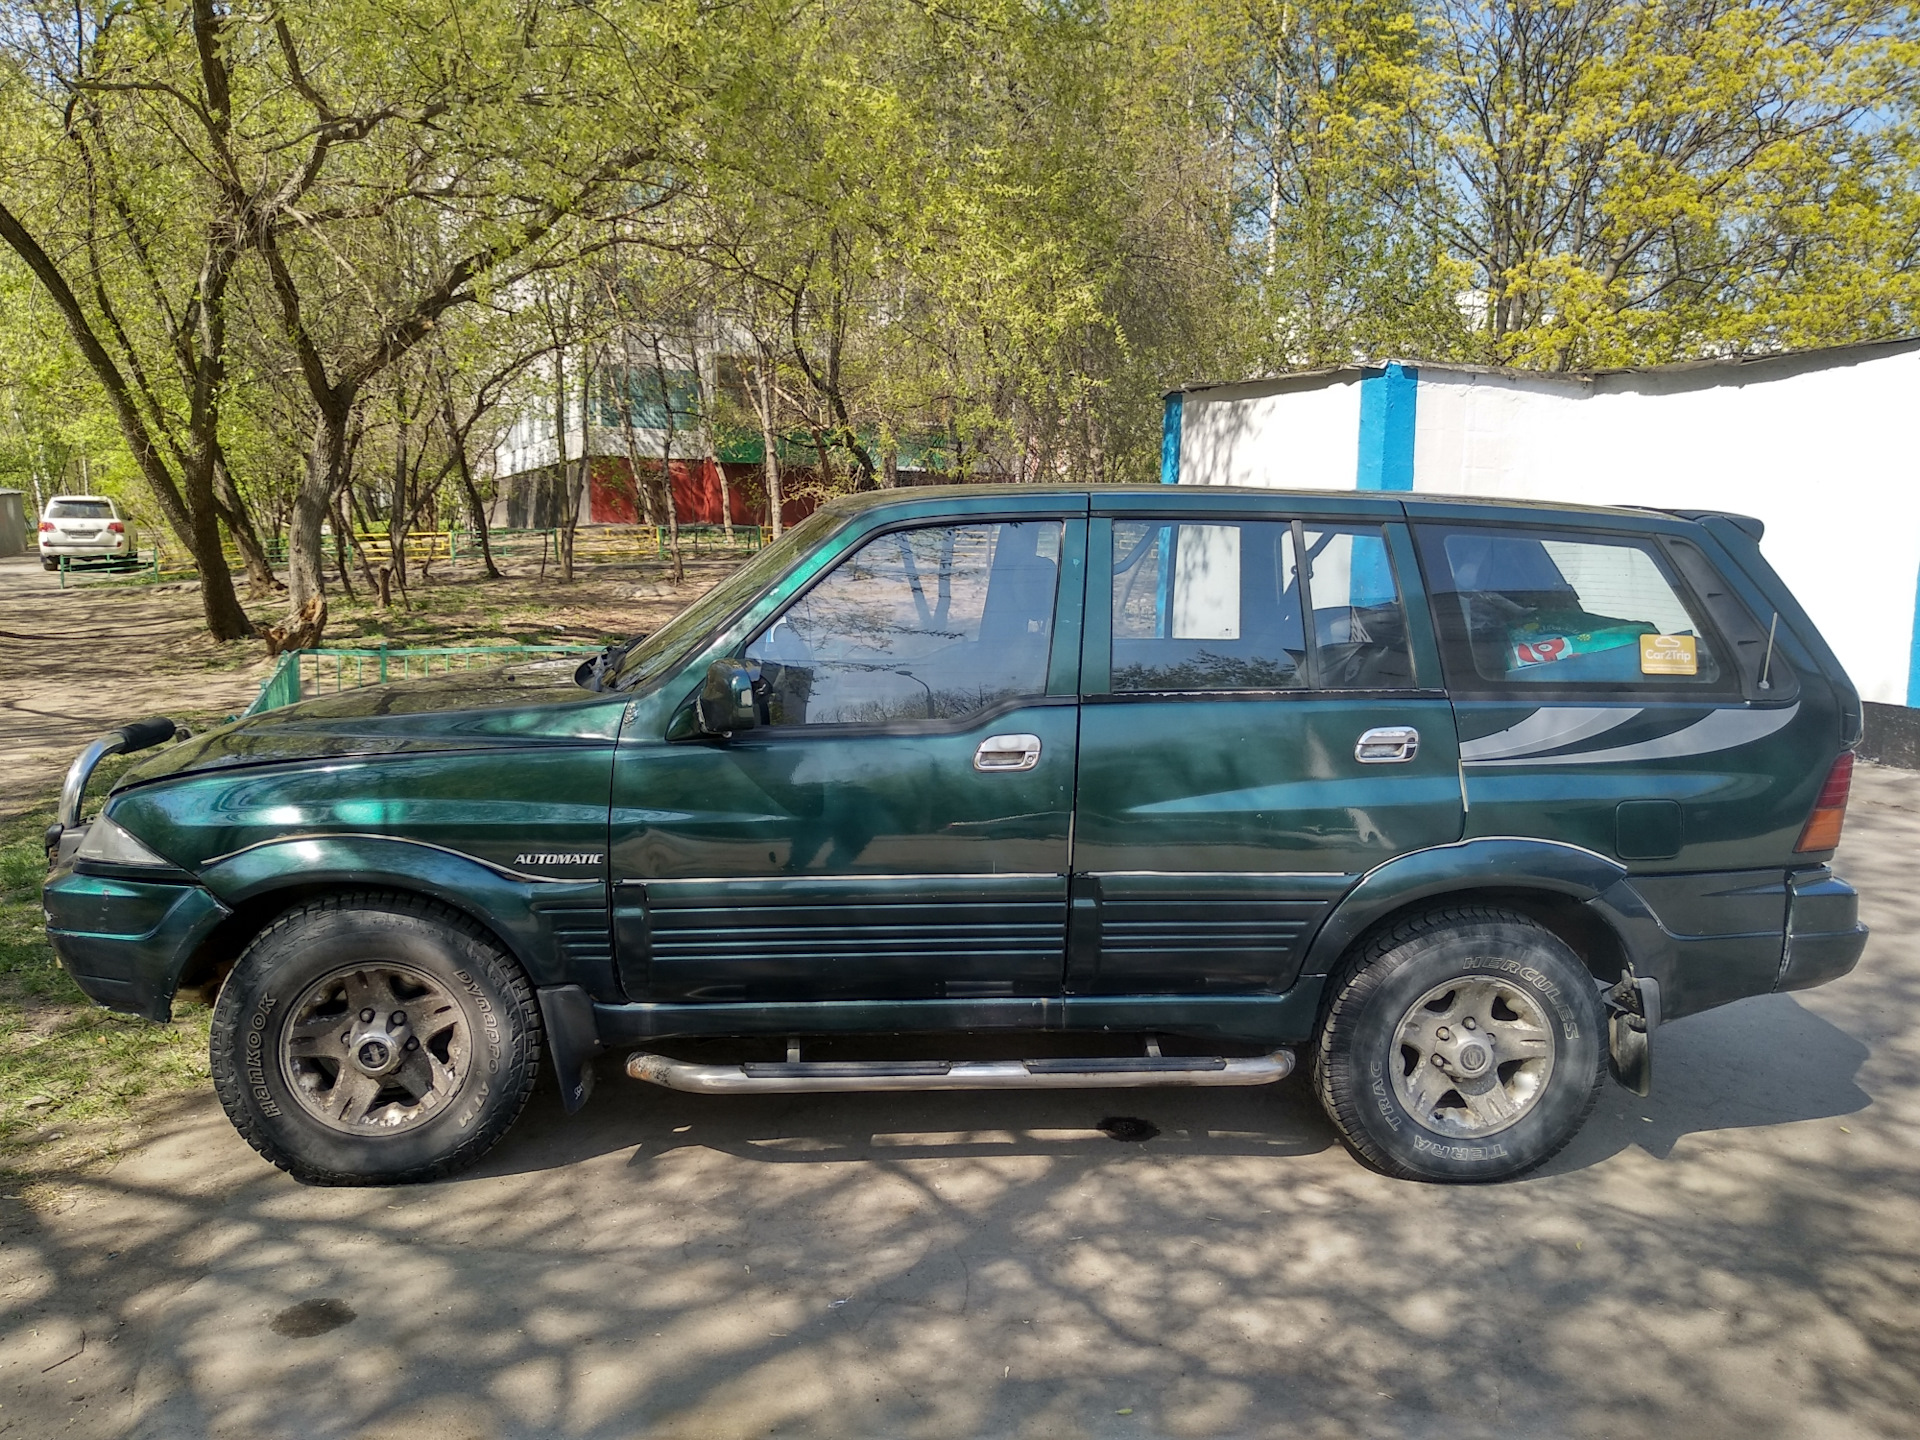 Муссо 2.9 дизель. SSANGYONG Musso. SSANGYONG - Musso 2.3 хаб. SSANGYONG Musso 2022. SSANGYONG Musso 1997 White.